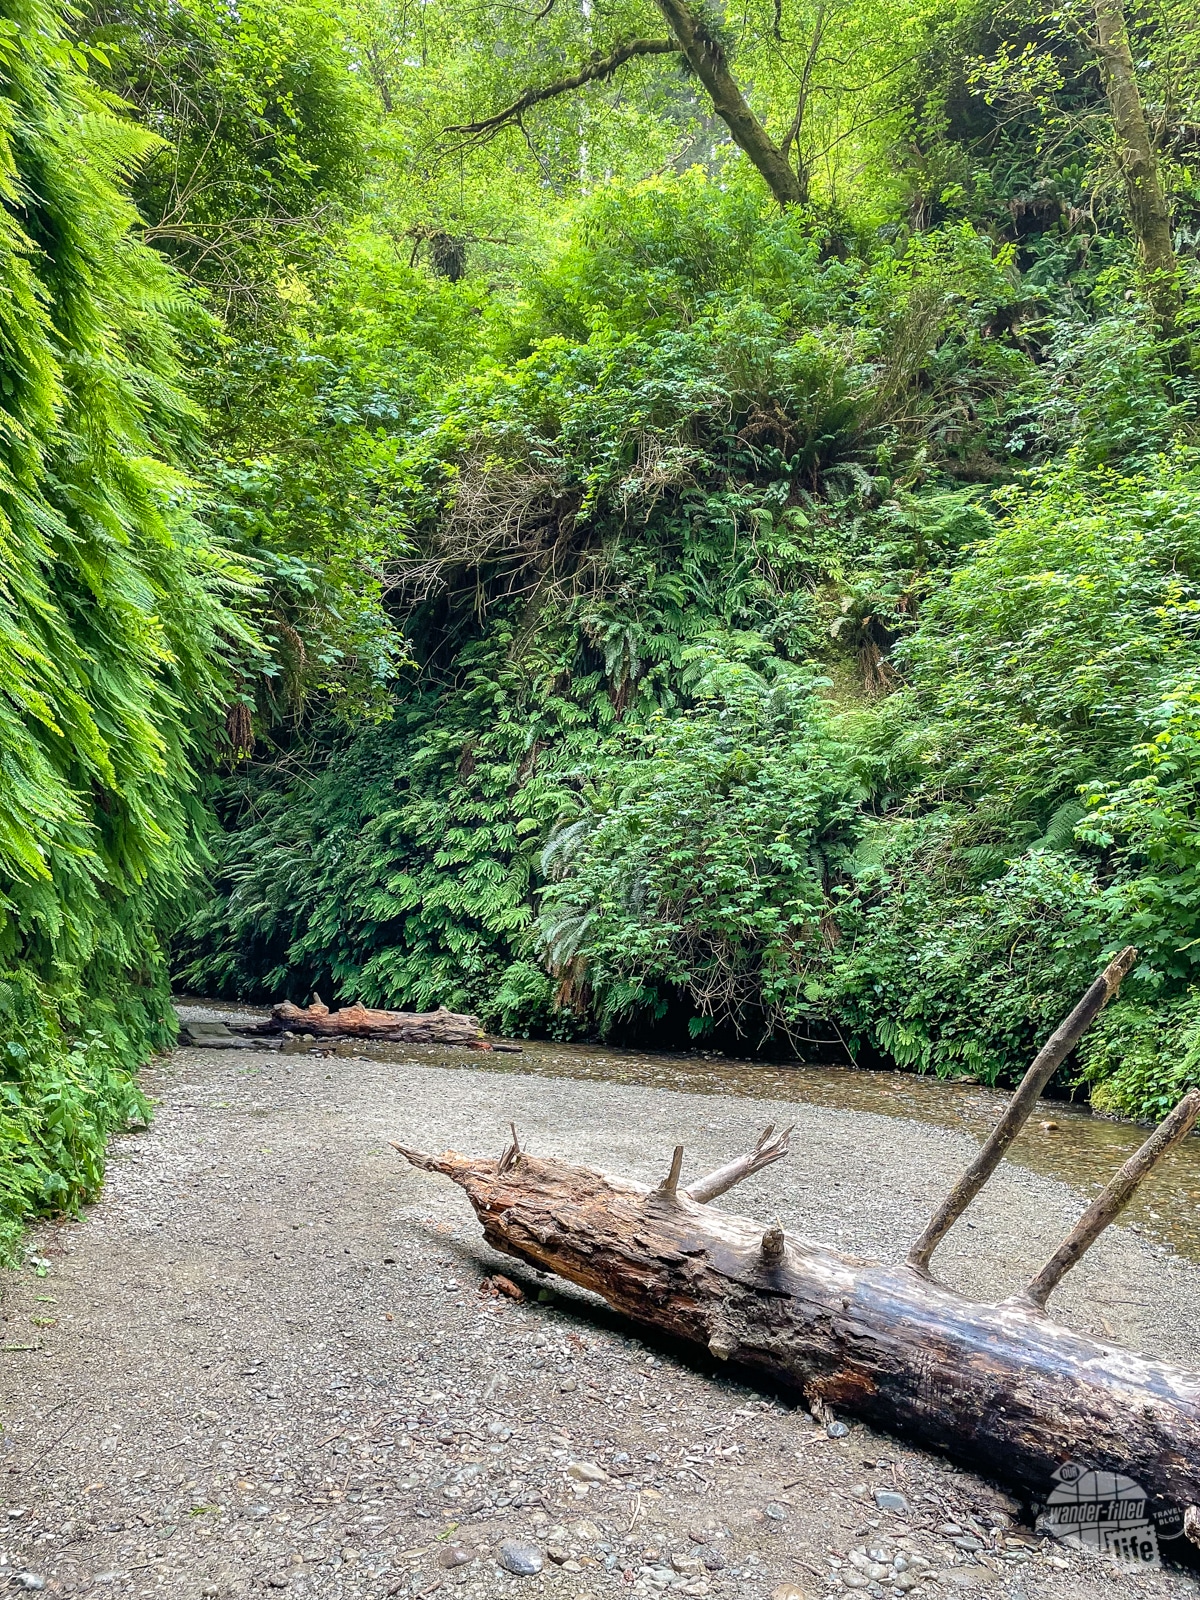 Fern Canyon at Redwood National Park.